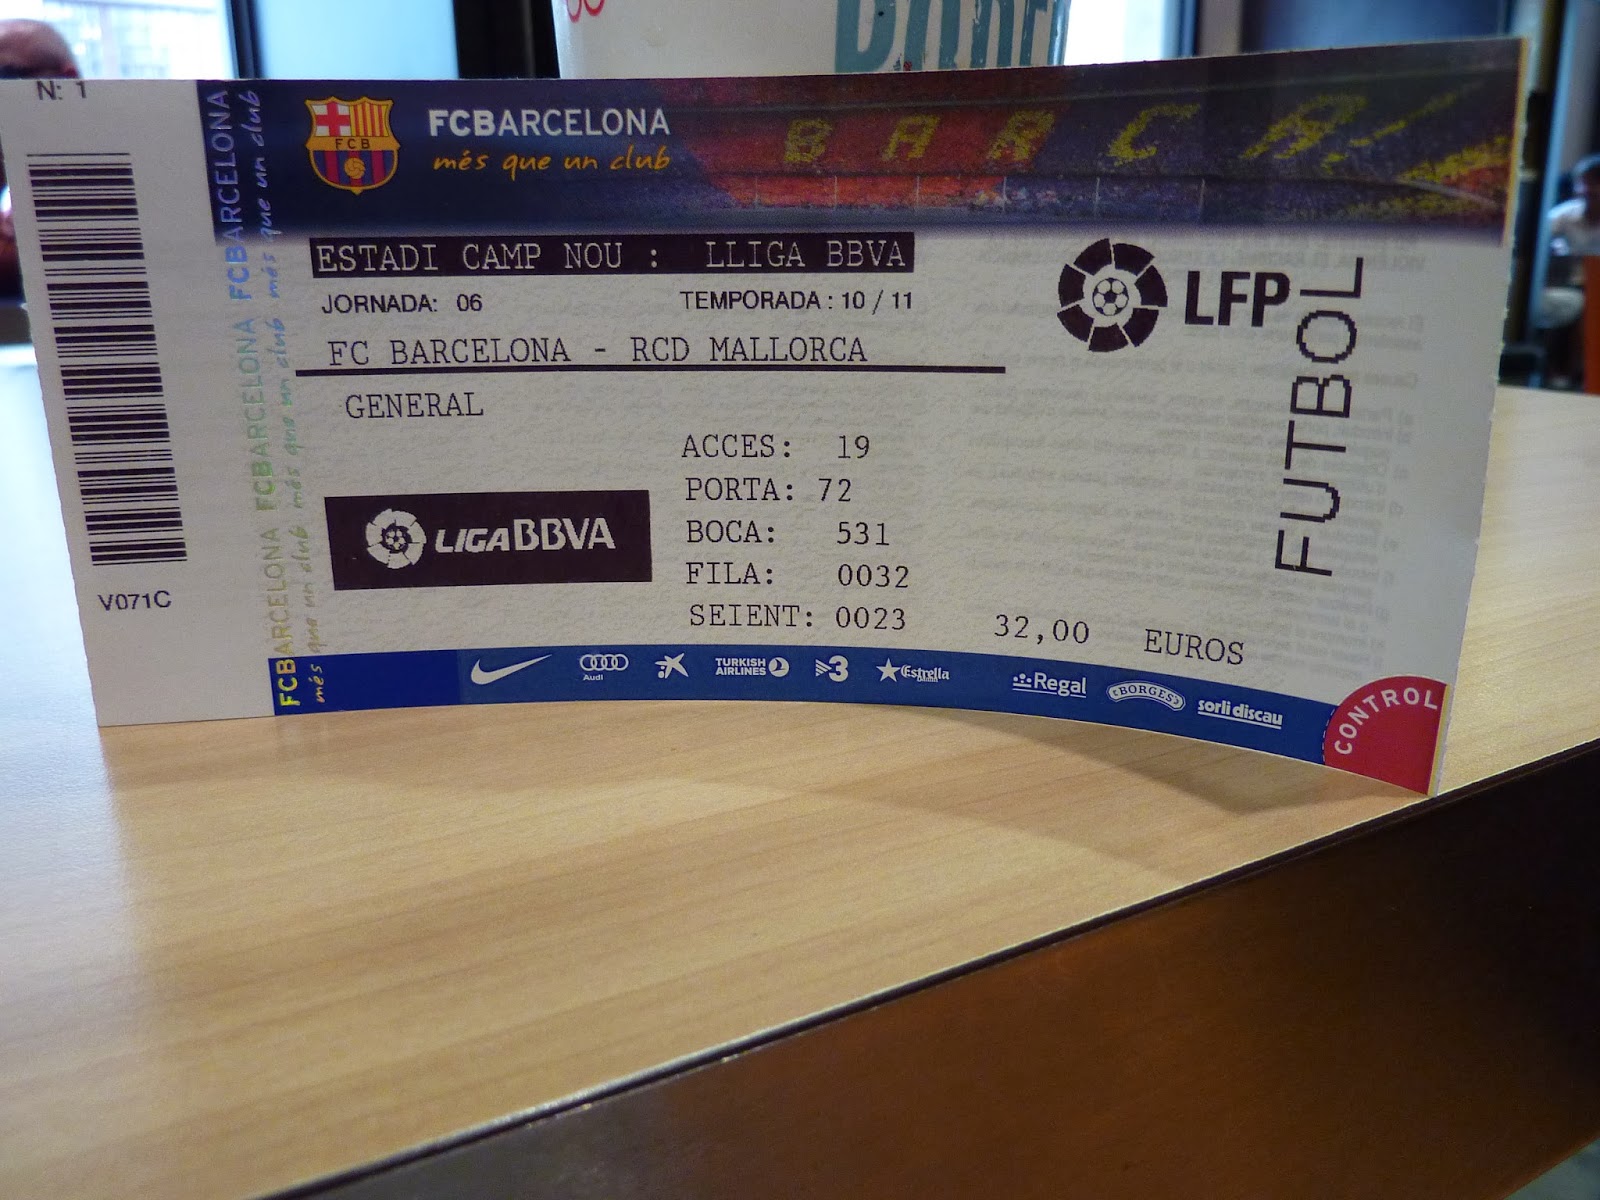 How to buy tickets for FC Barcelona match How hard can it be?